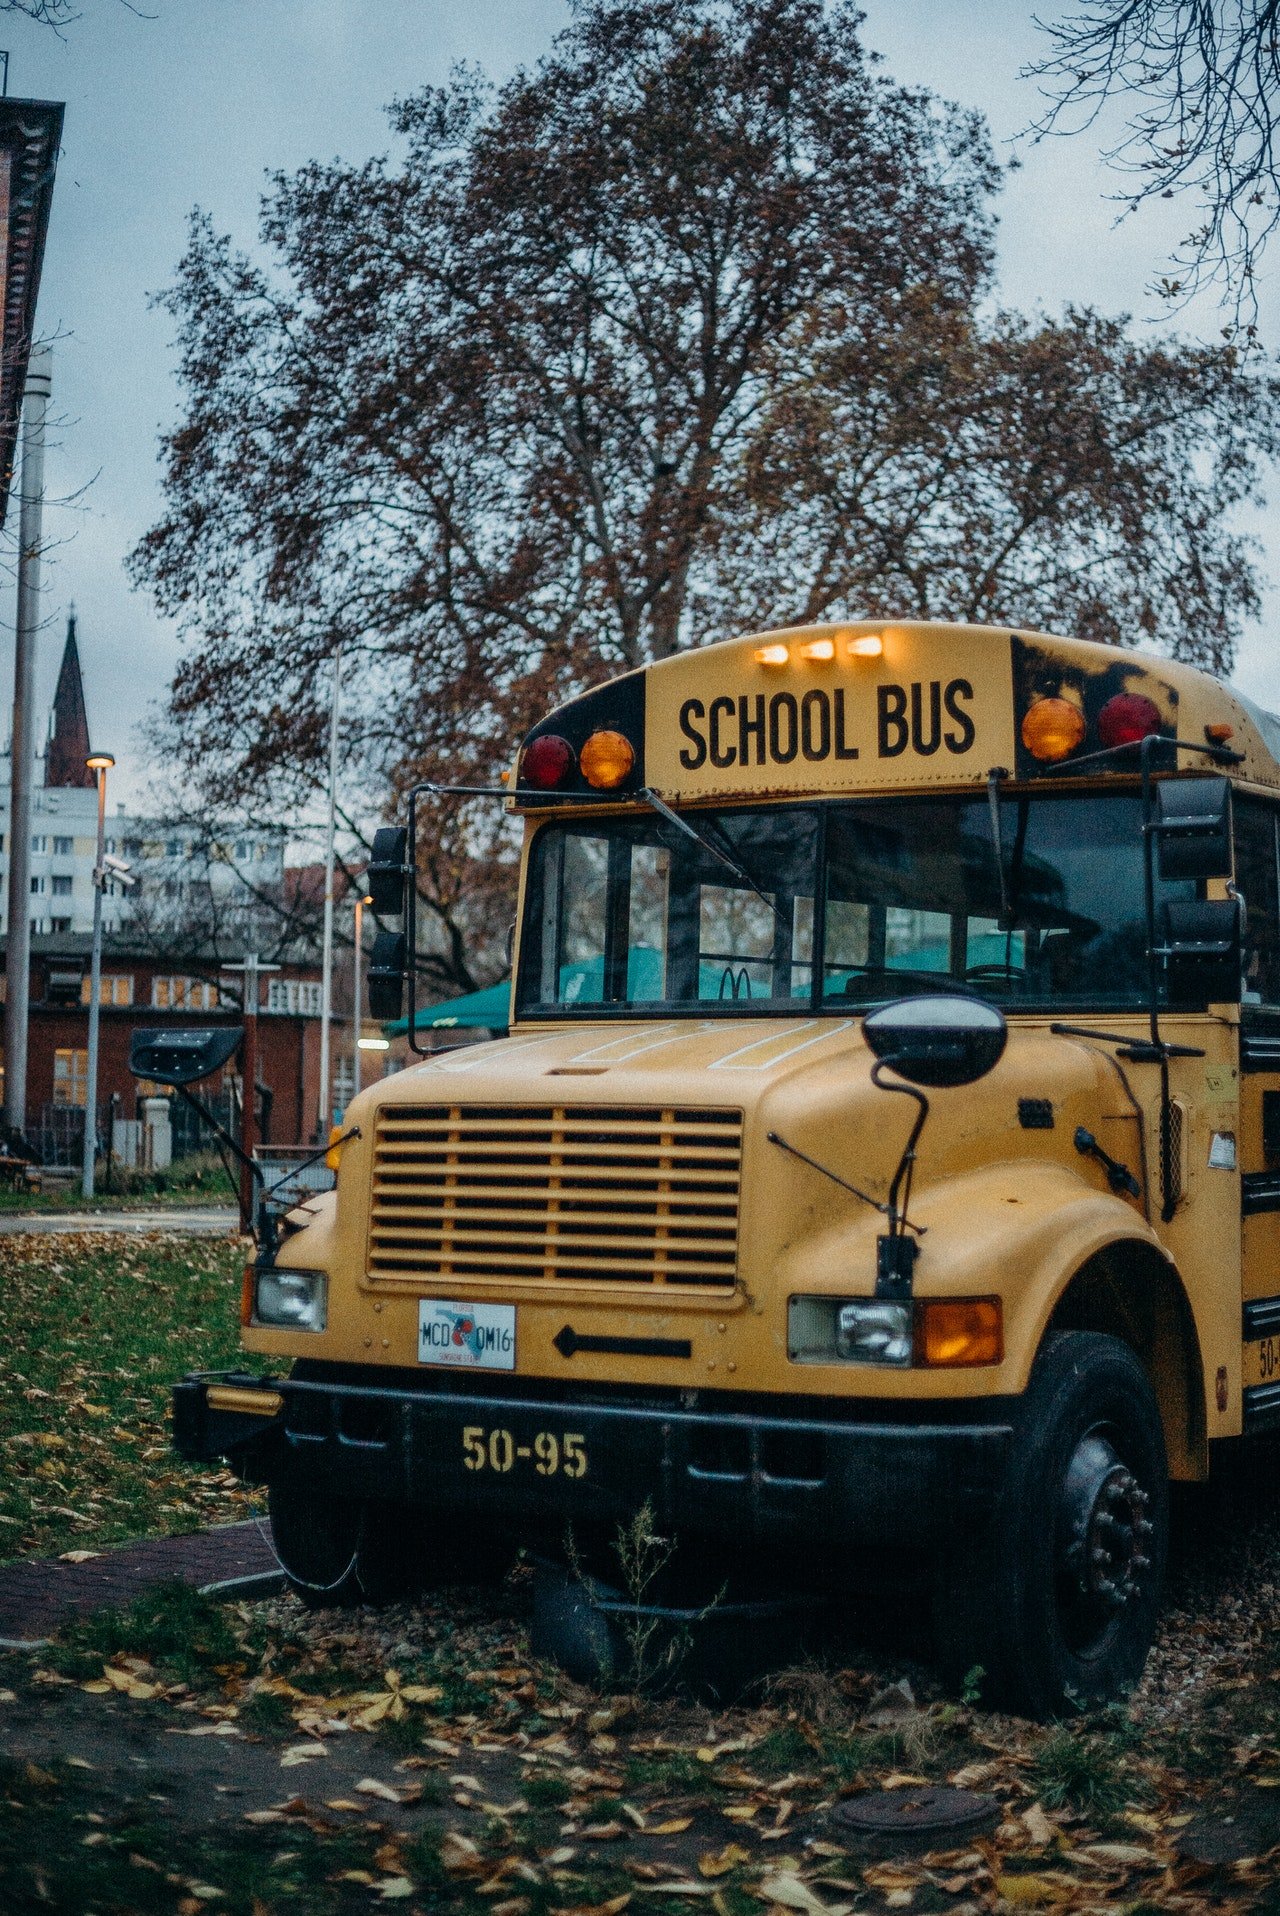 Another school bus arrived, and Lynn was confused. | Source: Pexels